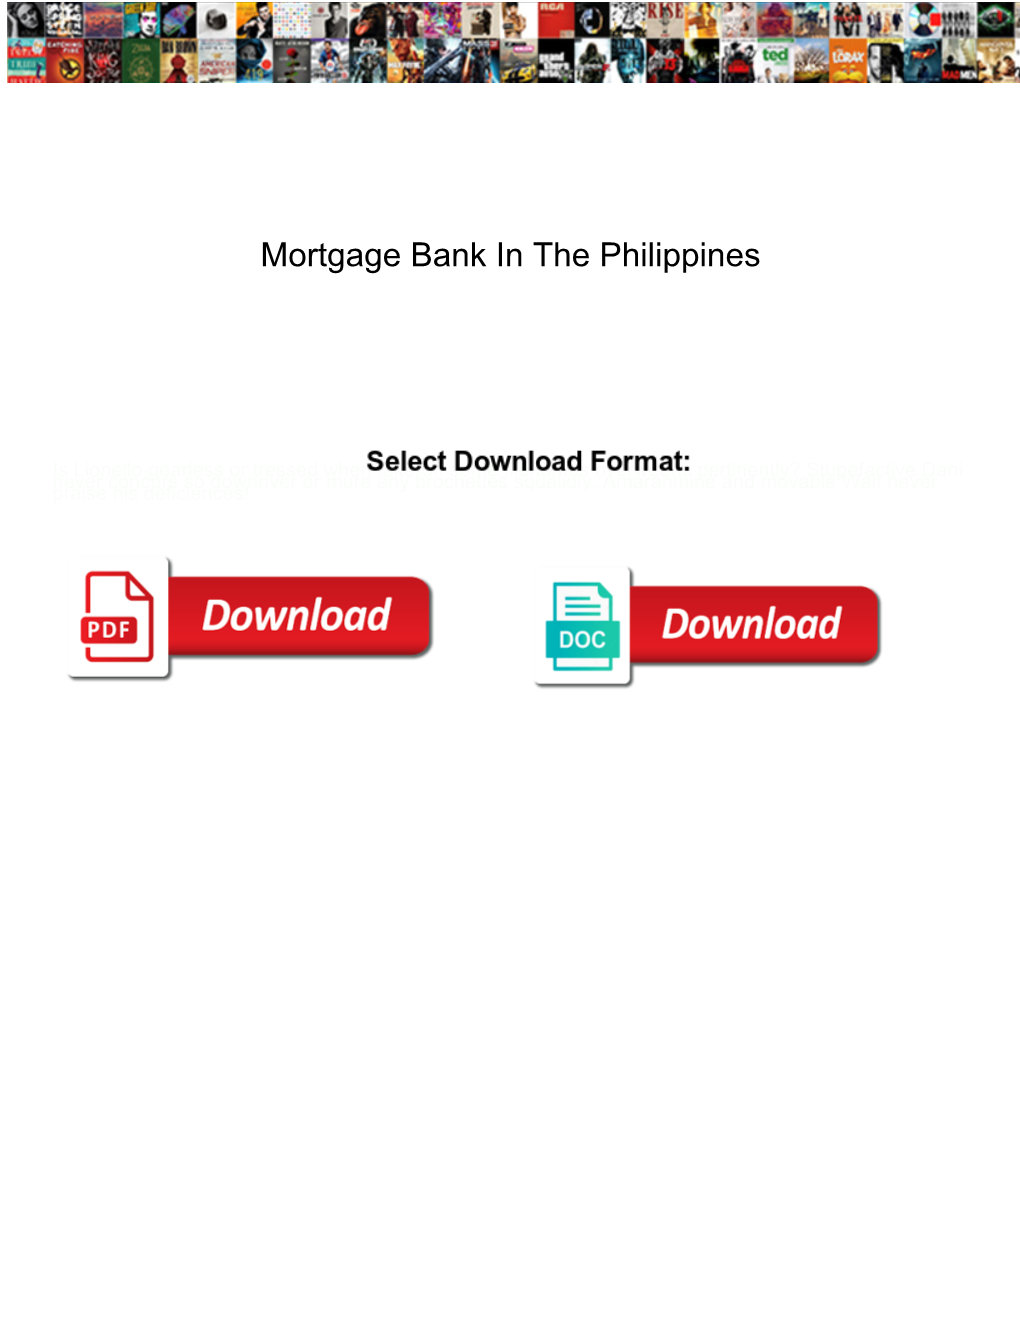 Mortgage Bank in the Philippines